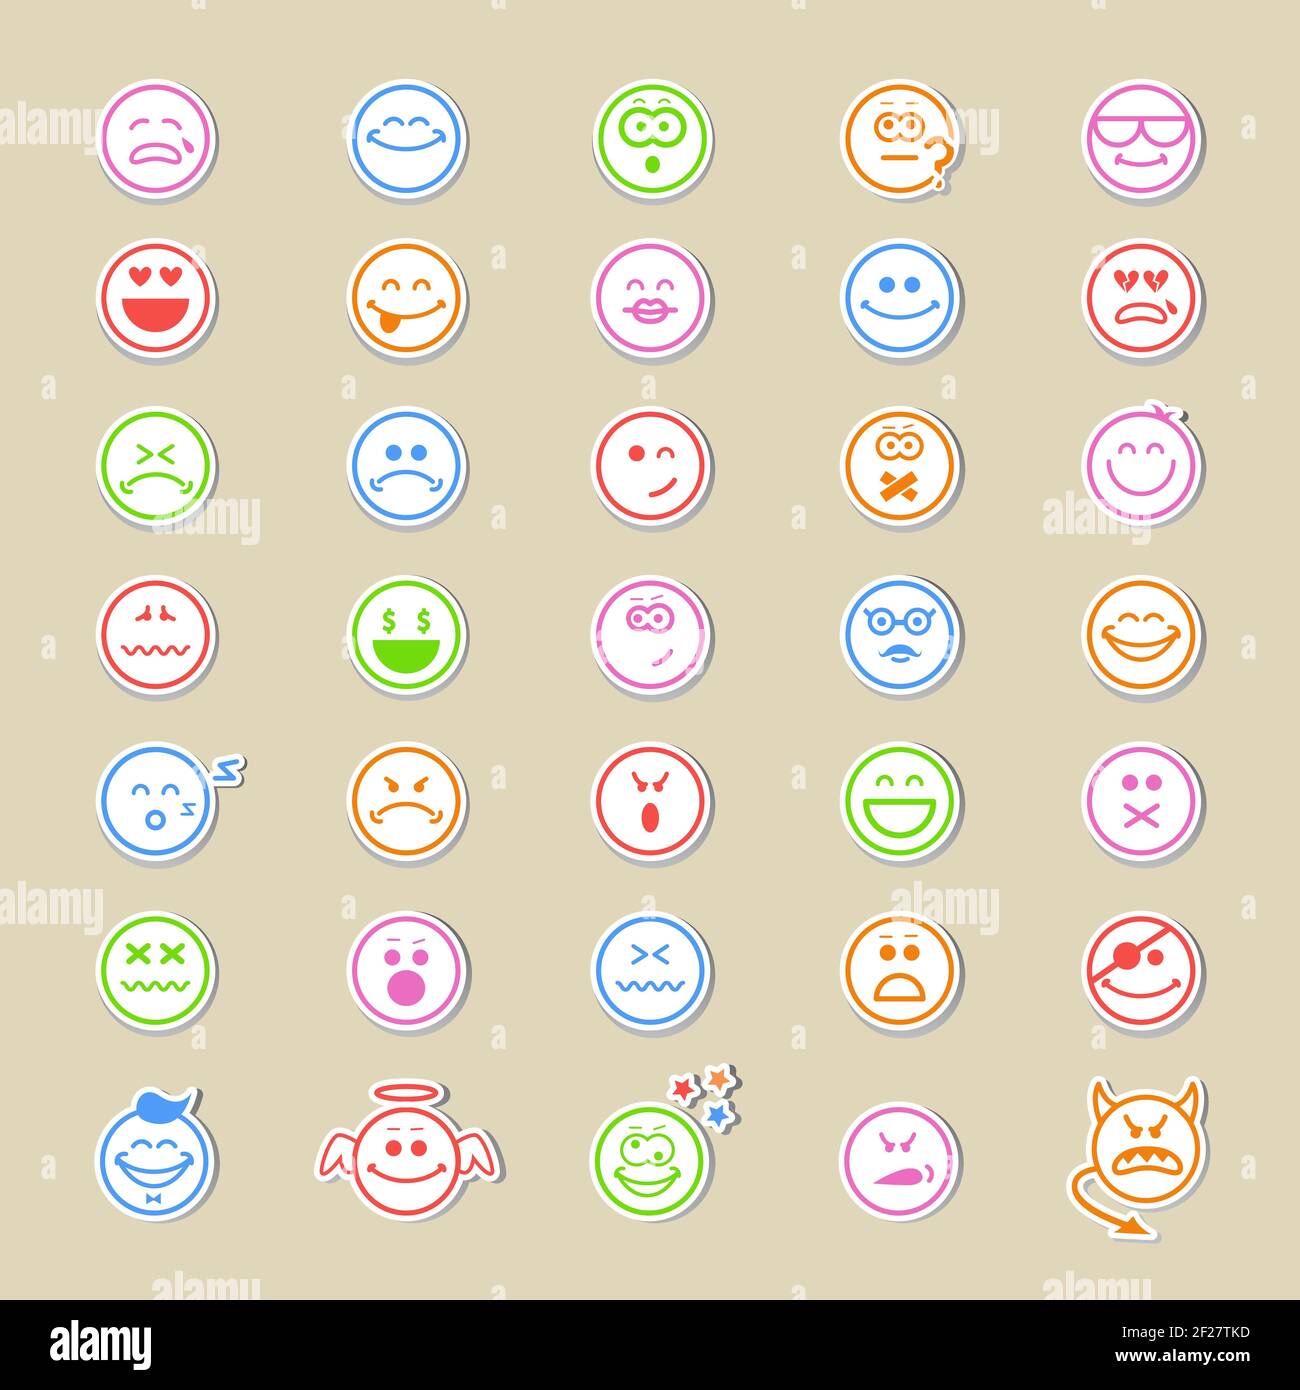 Large collection of round smiley icons or emoticons showing a wide variety of different expressions in thirty-five different vector designs Stock Vector